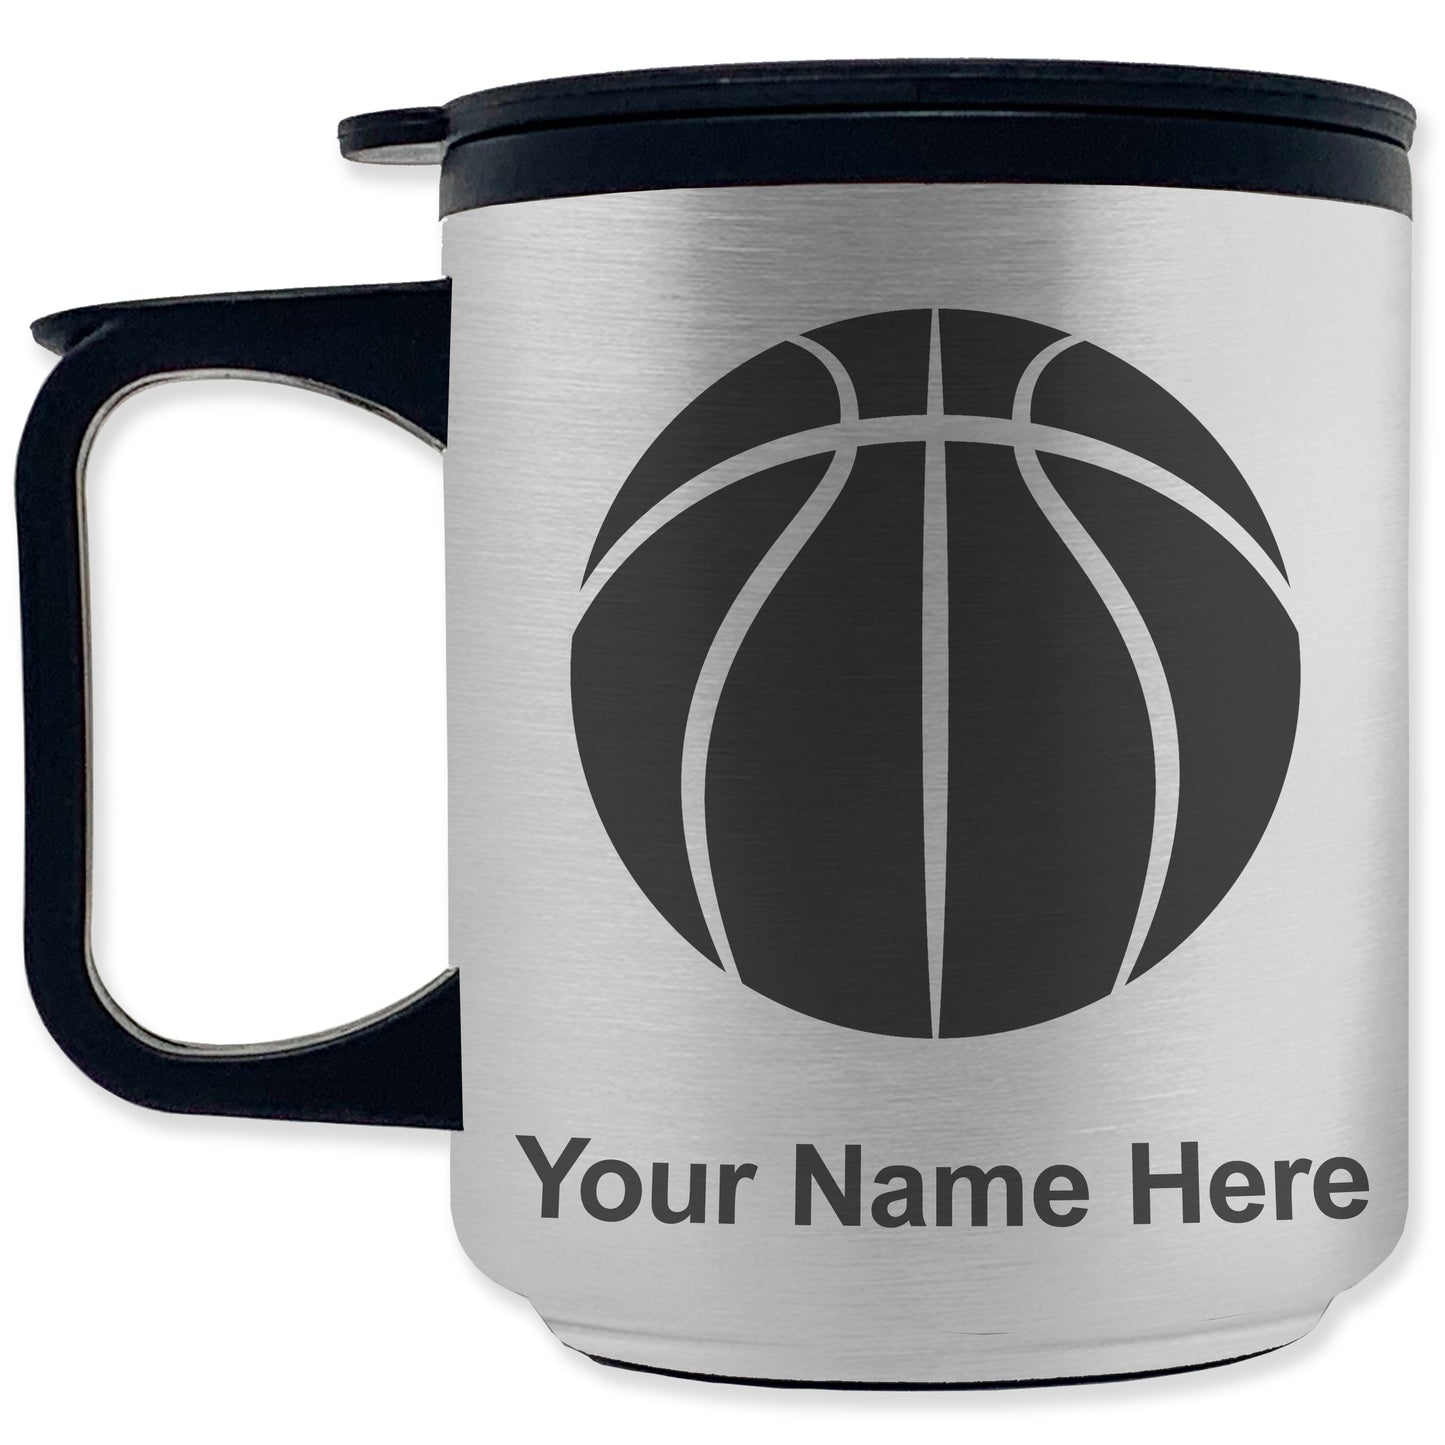 Coffee Travel Mug, Basketball Ball, Personalized Engraving Included